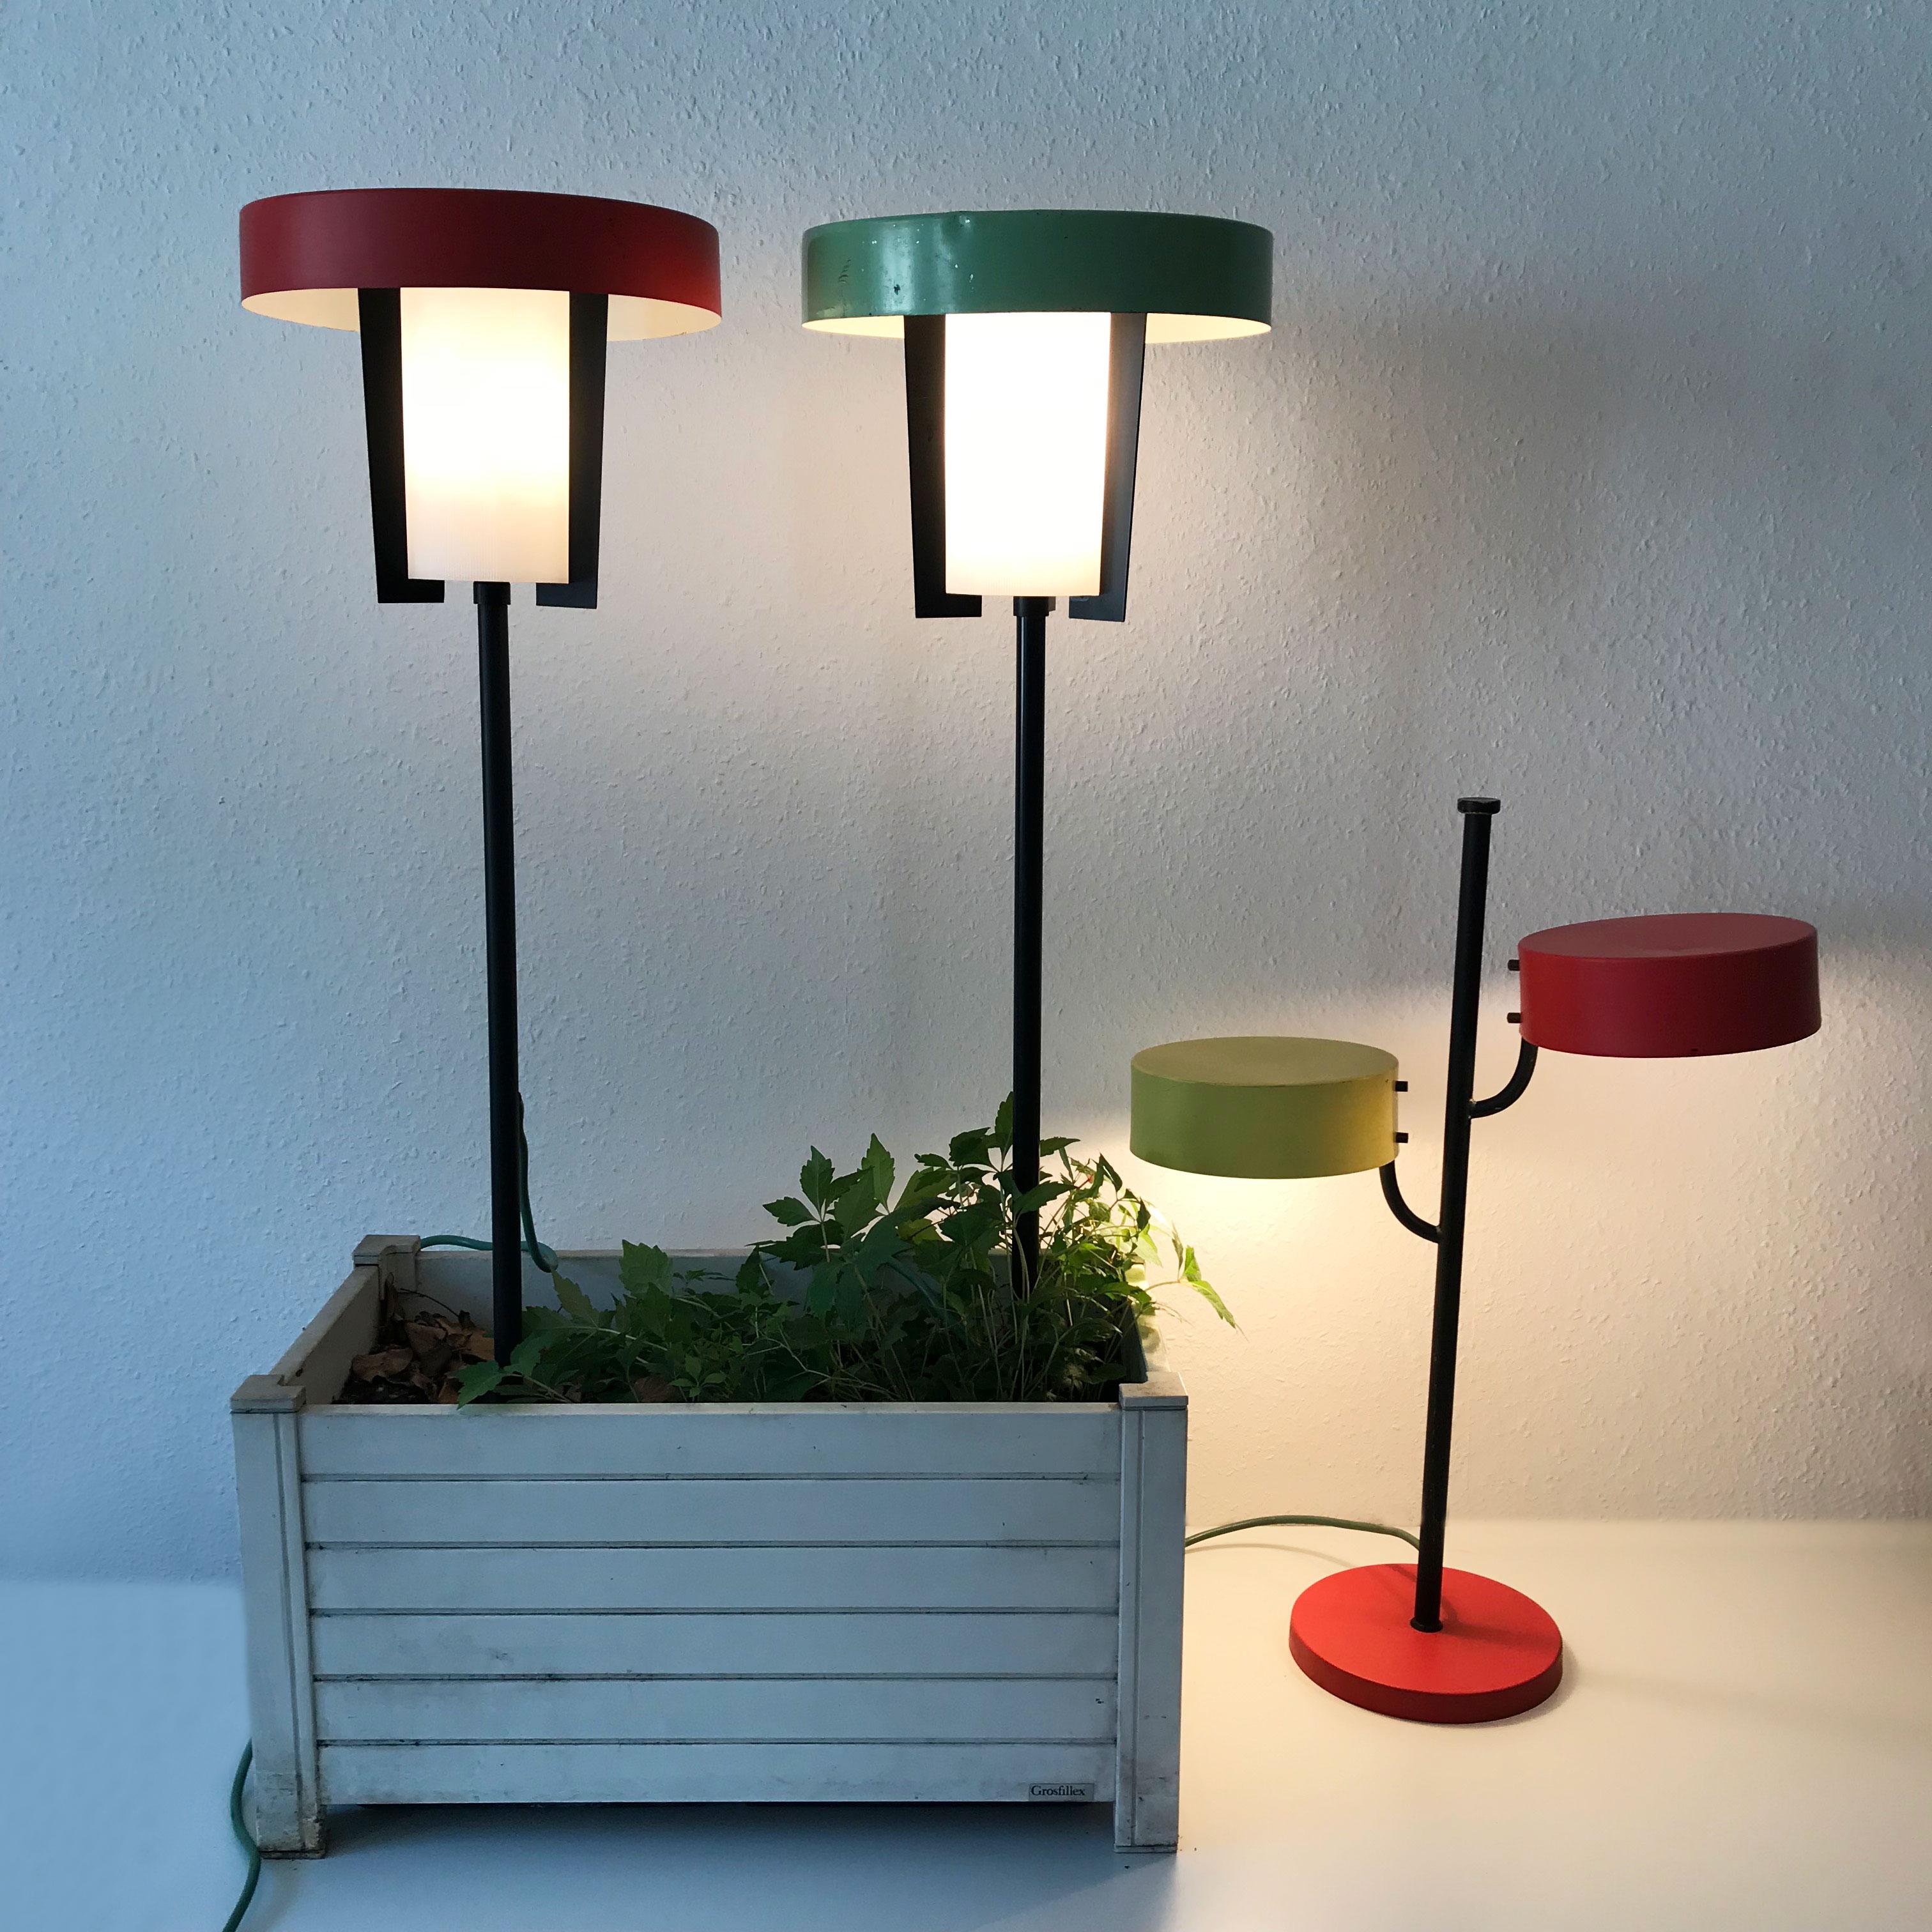 Set of three exceptional Mid-Century Modern outdoor or garden lights in a lovely combination of red, yellow, green, white and black colors. Manufactured by Manufactured by Kaiser Leuchten, Germany, 1950s.

Executed in red, yellow, green and black